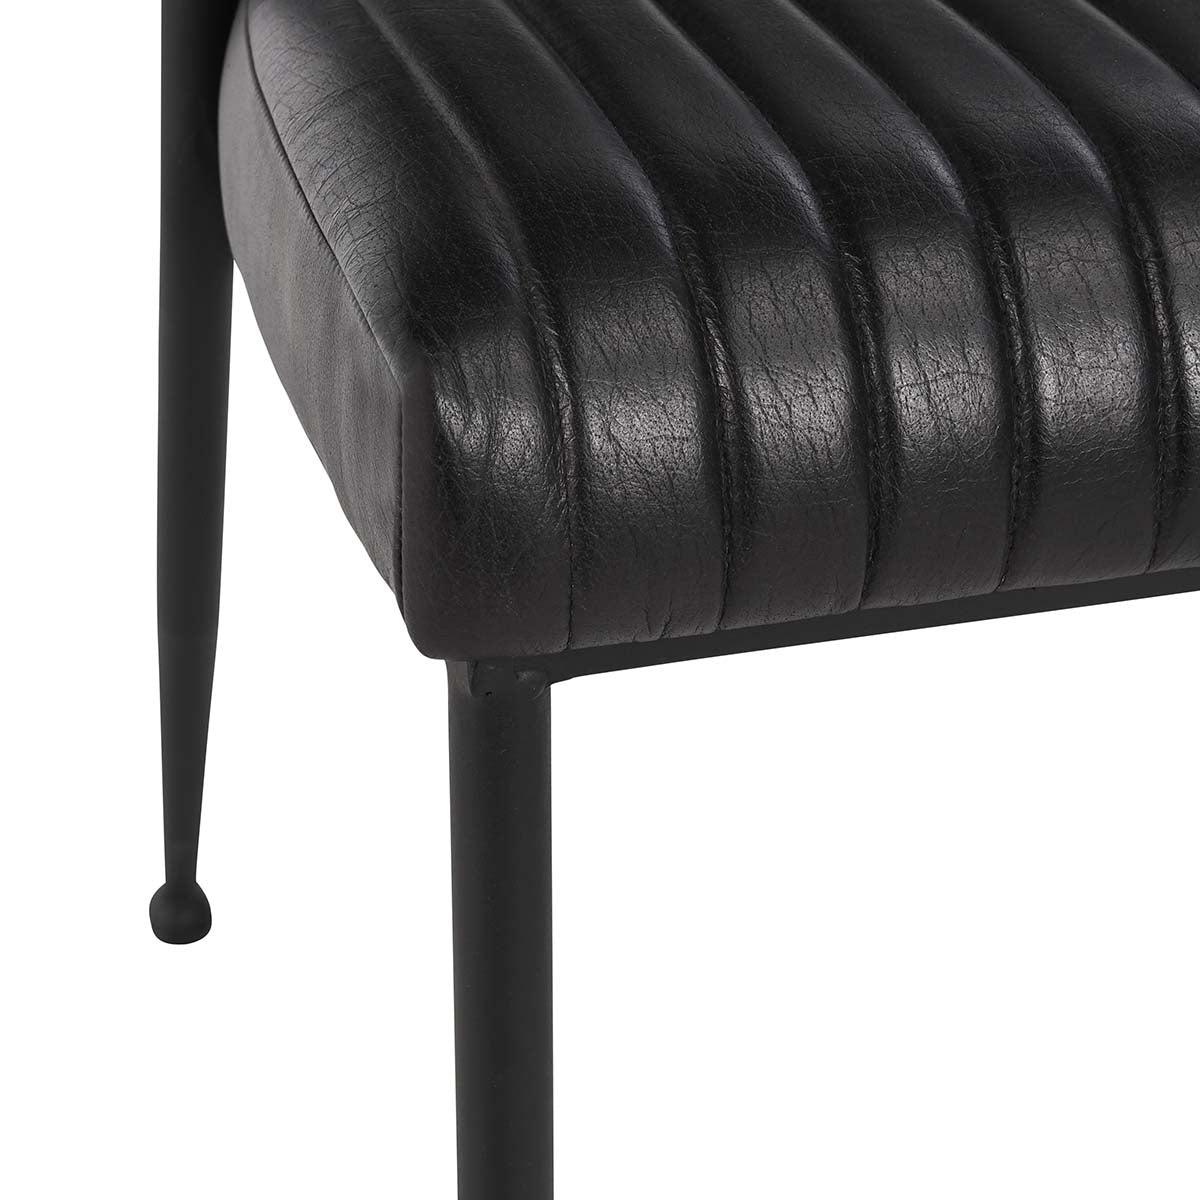 Umbria Accent or Dining Chair, Black